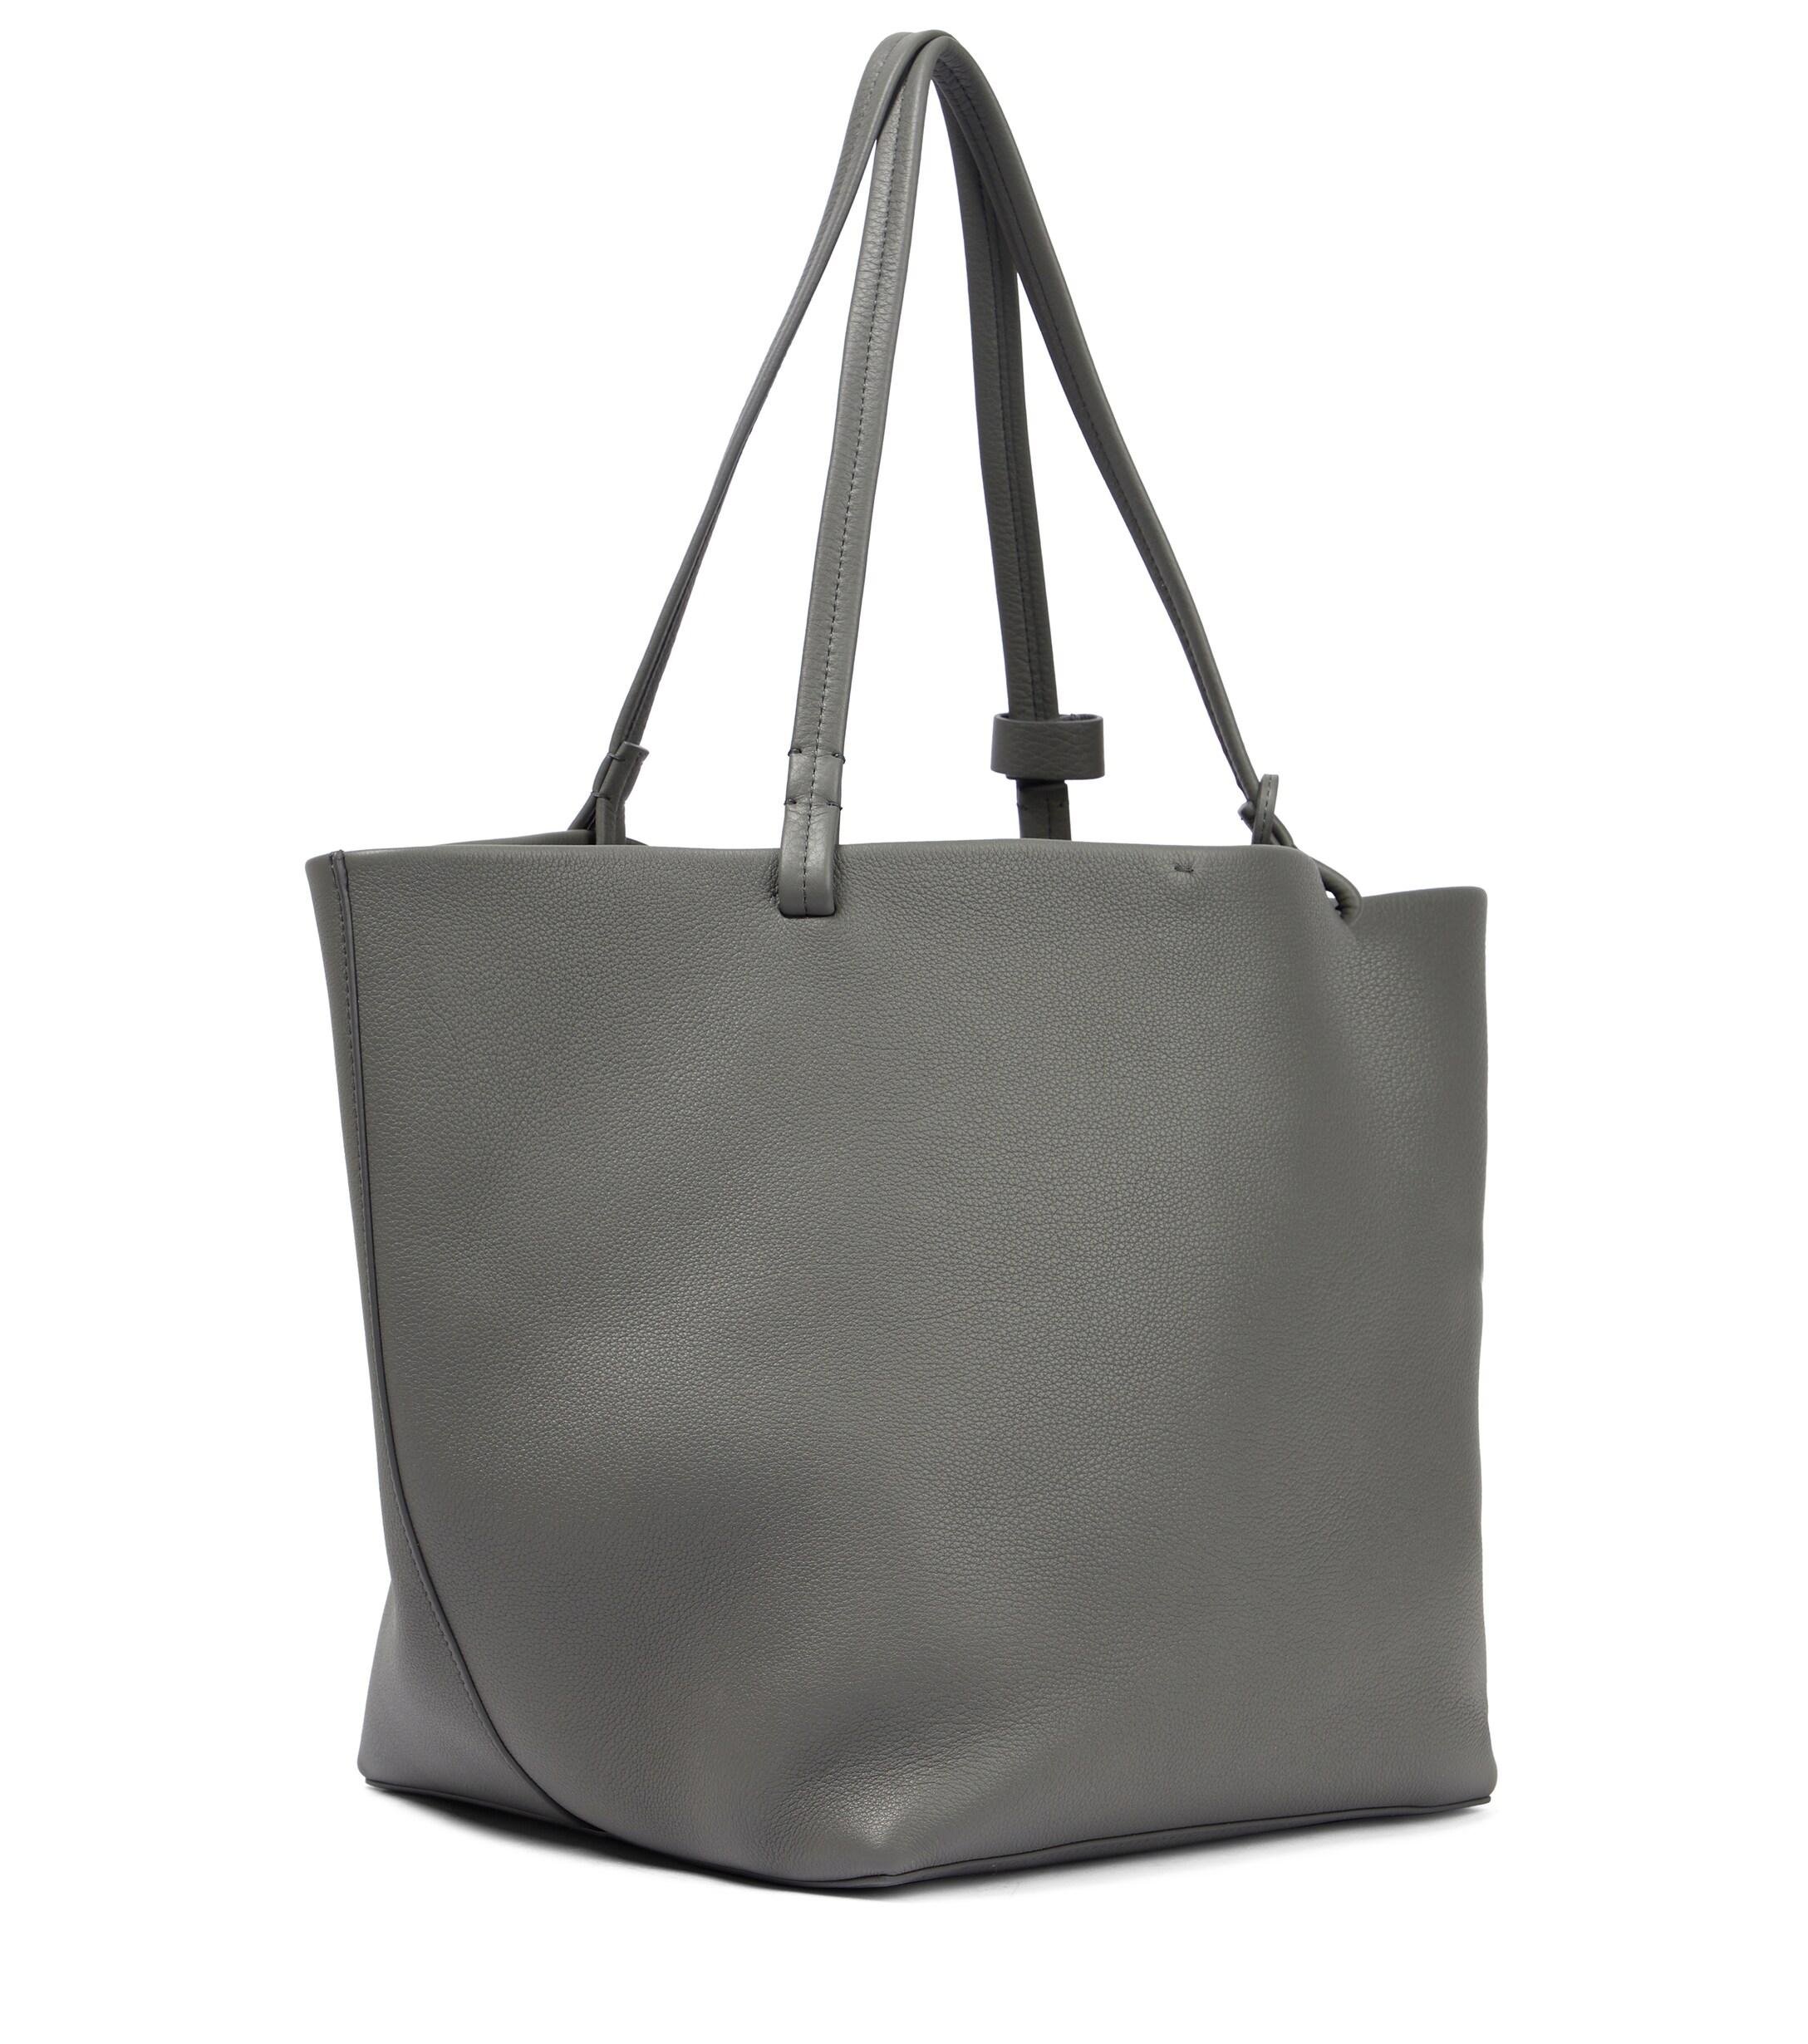 The Row, Park tote 3 lux black leather bag